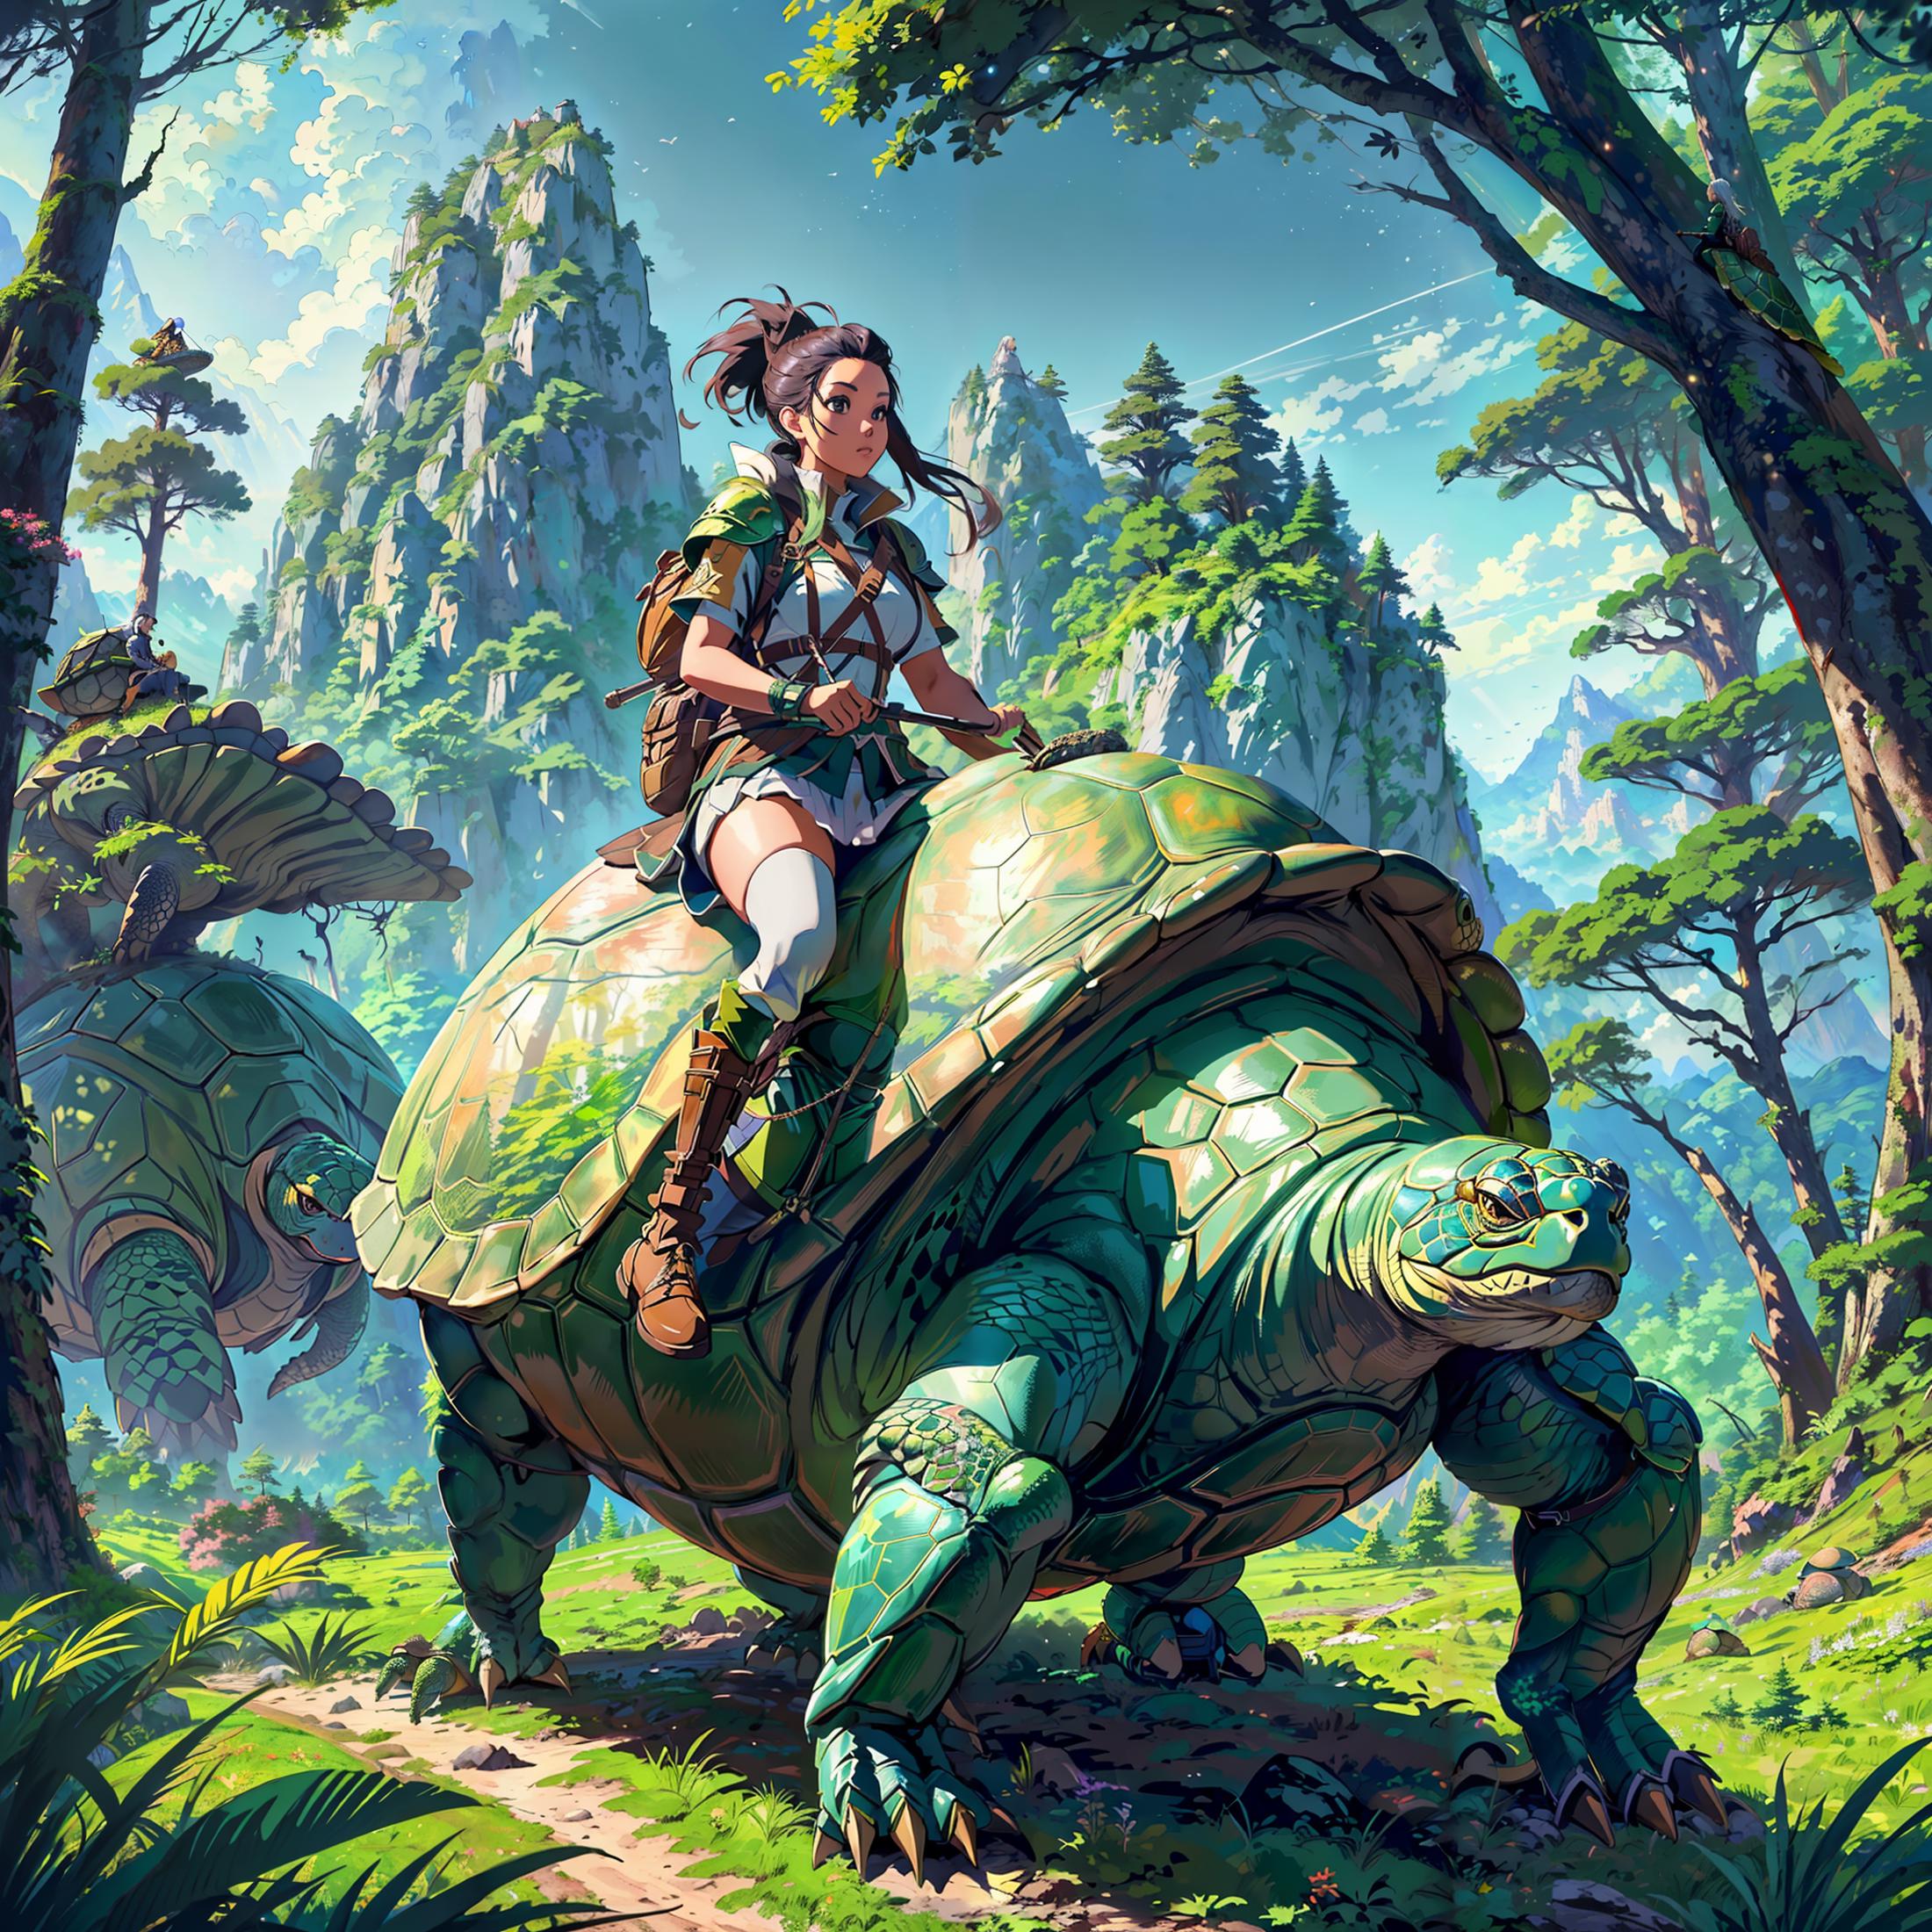 A woman riding a green turtle in a forest with mountains in the background.